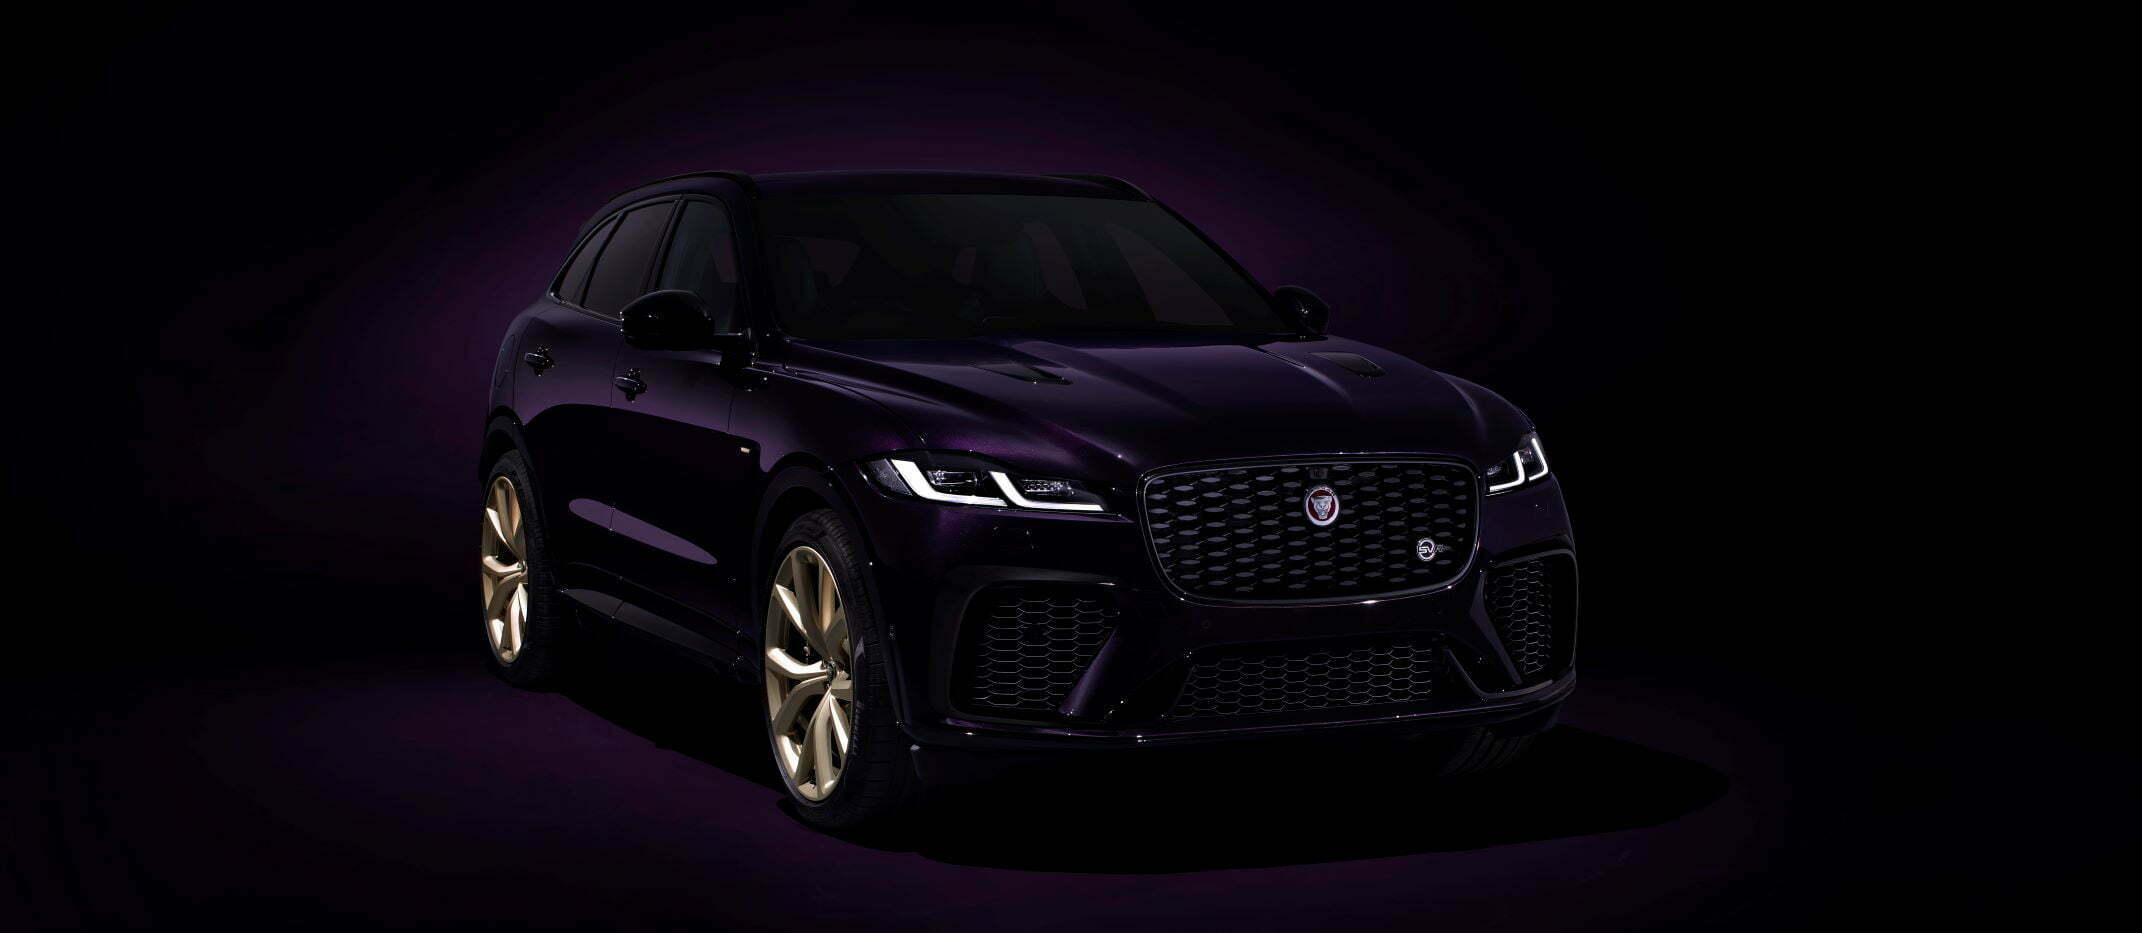 2022 Jaguar F-PACE SVR Edition 1988 India Launch Soon - Bookings Open! (4)